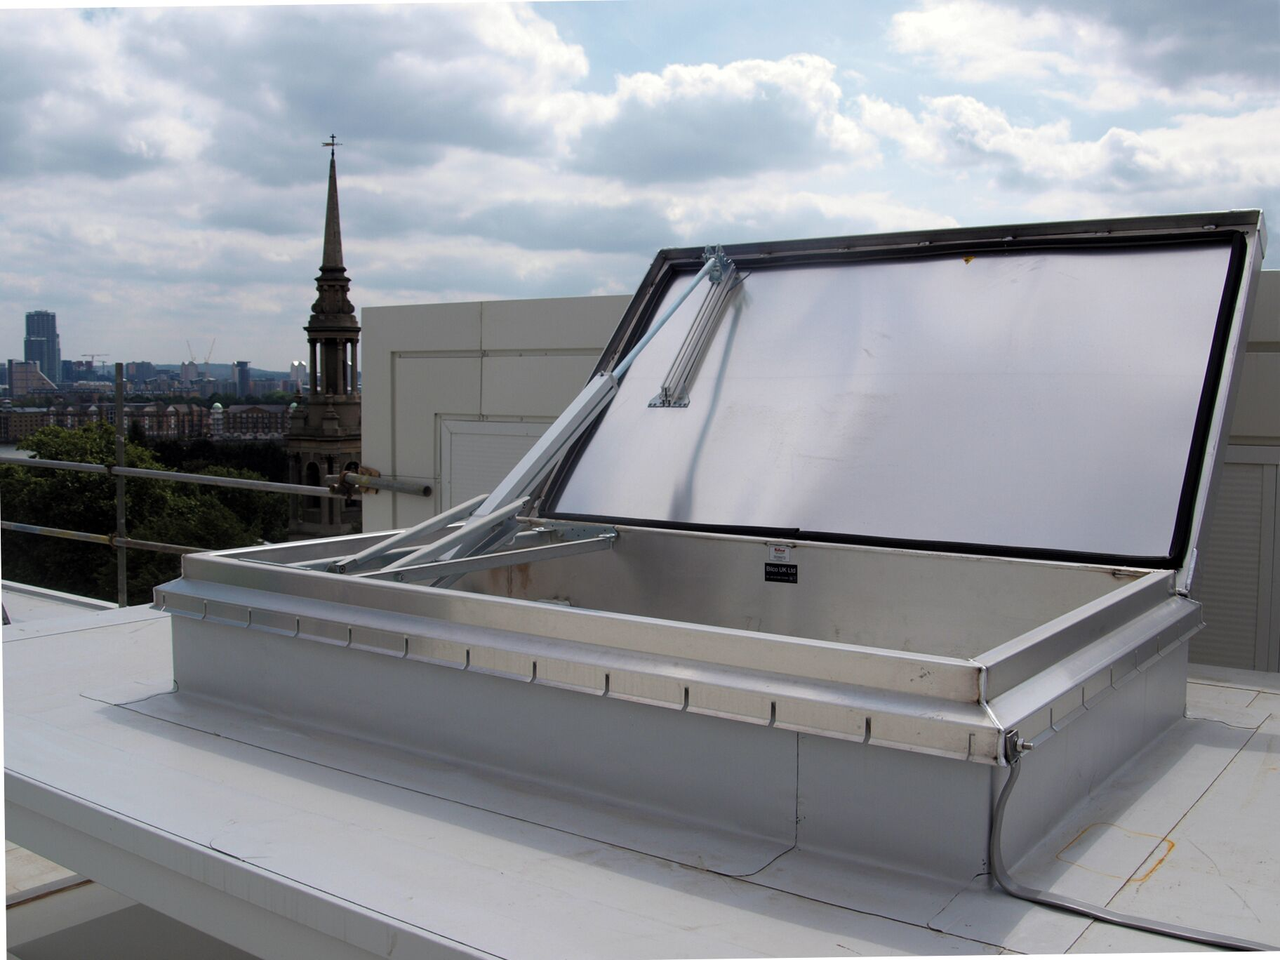 Take the smart approach to specifying smoke vents